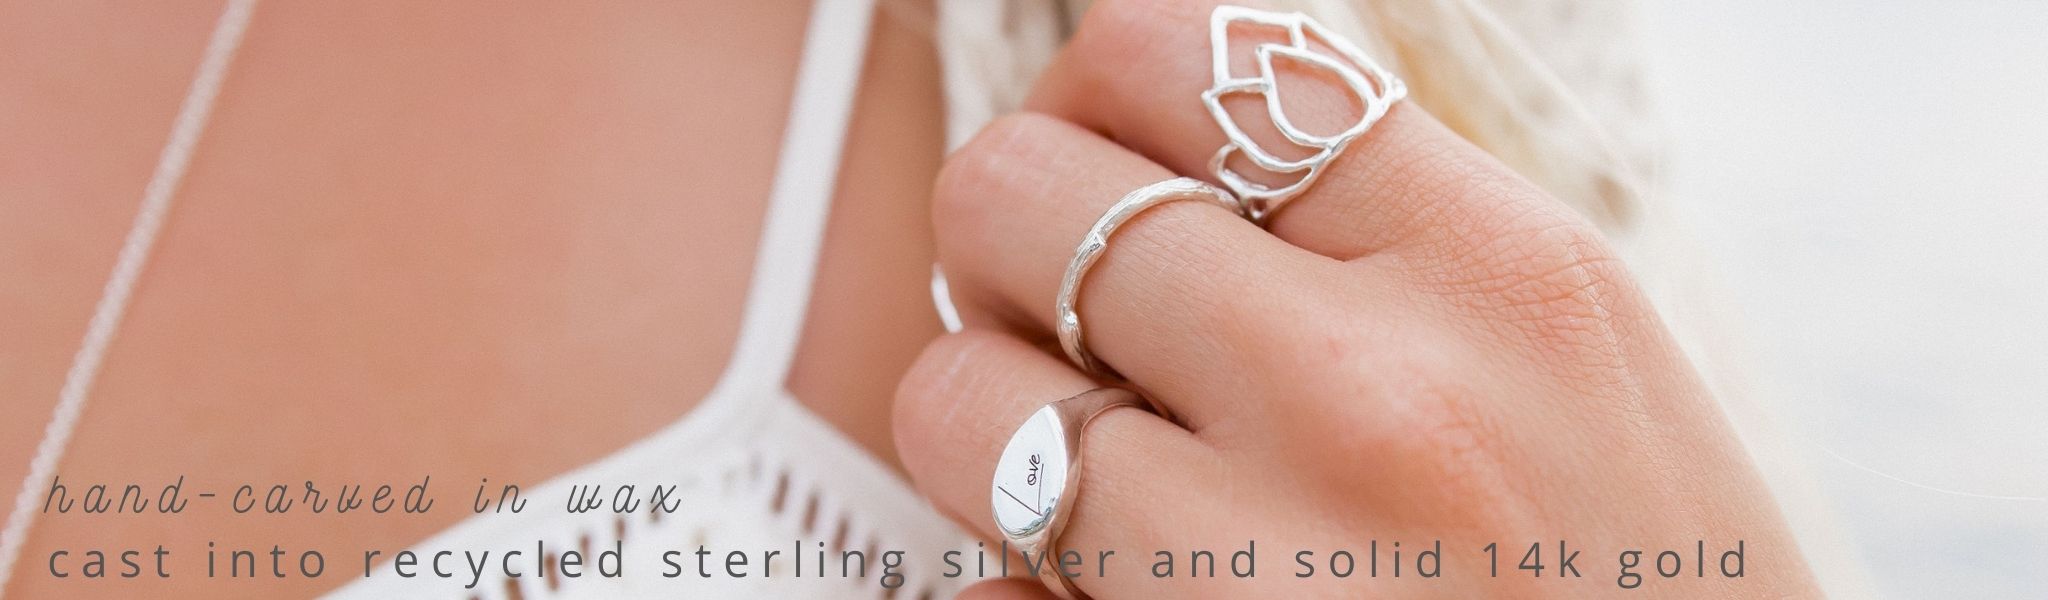 Blooming Lotus Jewelry Rings - Meaningful Jewelry